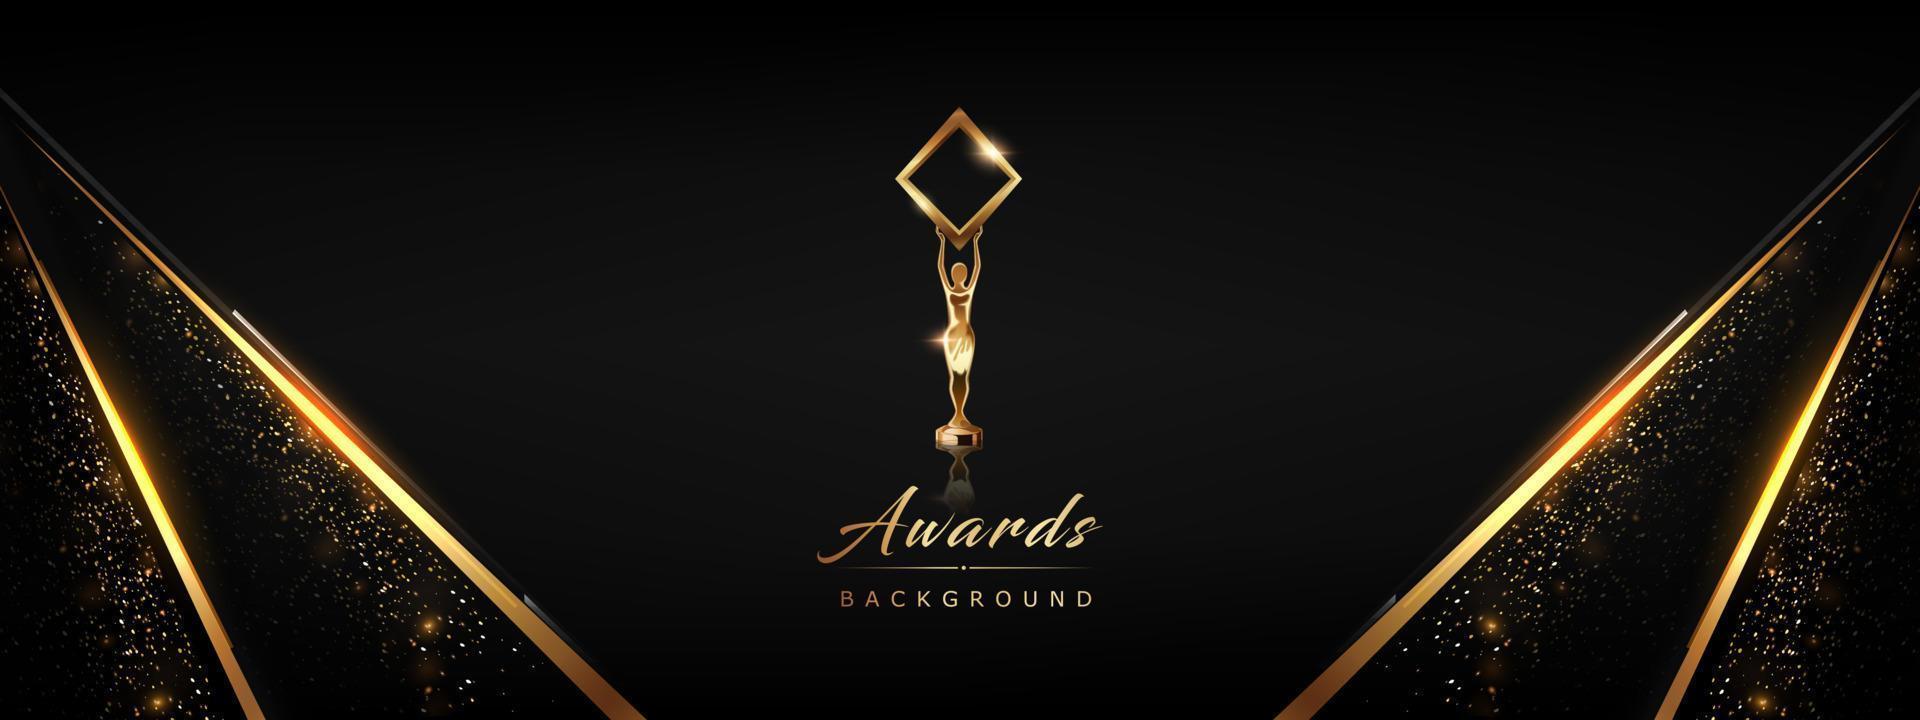 Black Golden Award Background. Jubilee Night Decorative Invitation. Stage platform. Elegant Luxury Side Abstract Shape with Crystal Edge effect. Corporate Entertainment Hollywood Bollywood Night. vector